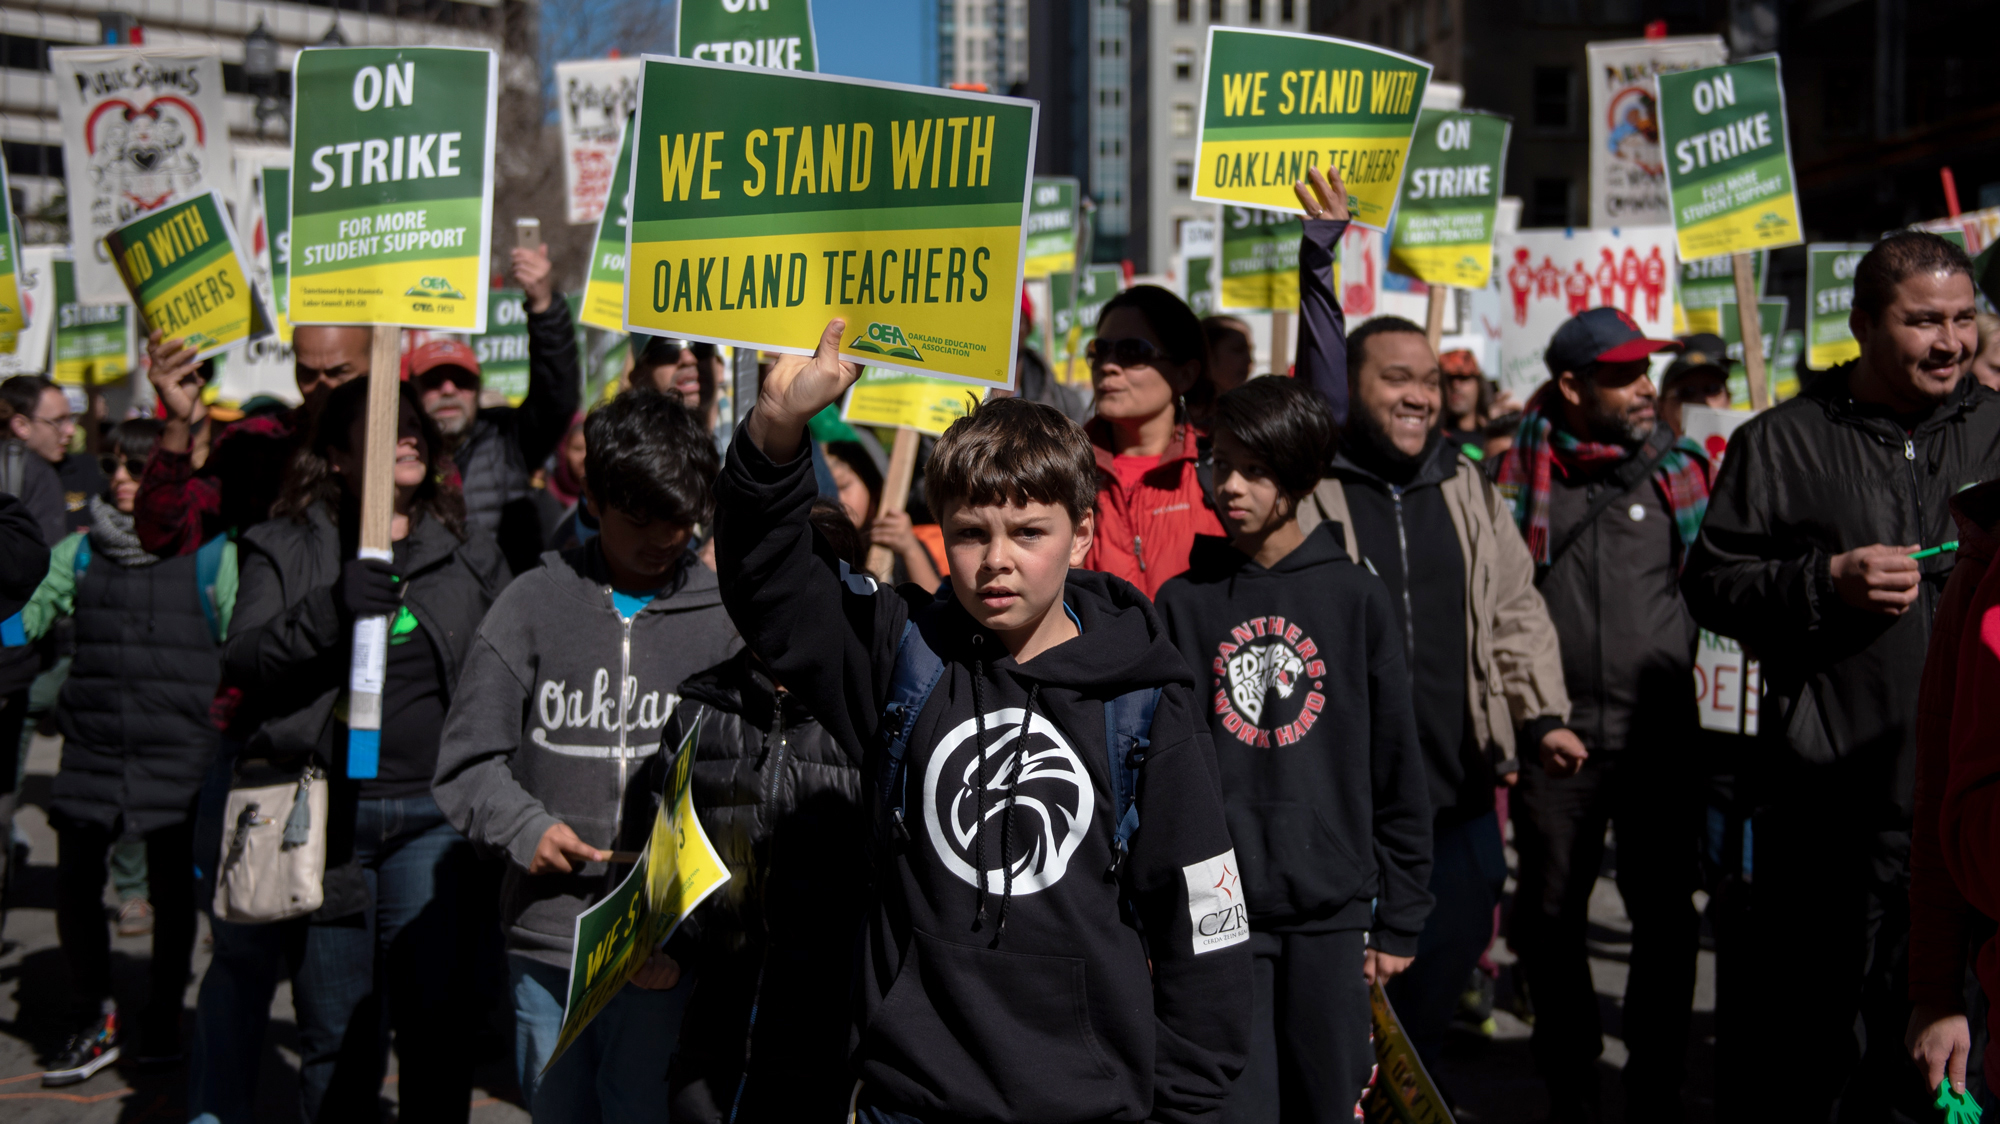 On the first day of a district-wide strike, students joined their teachers in Oakland, Calif., to demand higher wages for educators and more resources for public schools. Gabe, 10, holds a sign during the march in downtown Oakland.